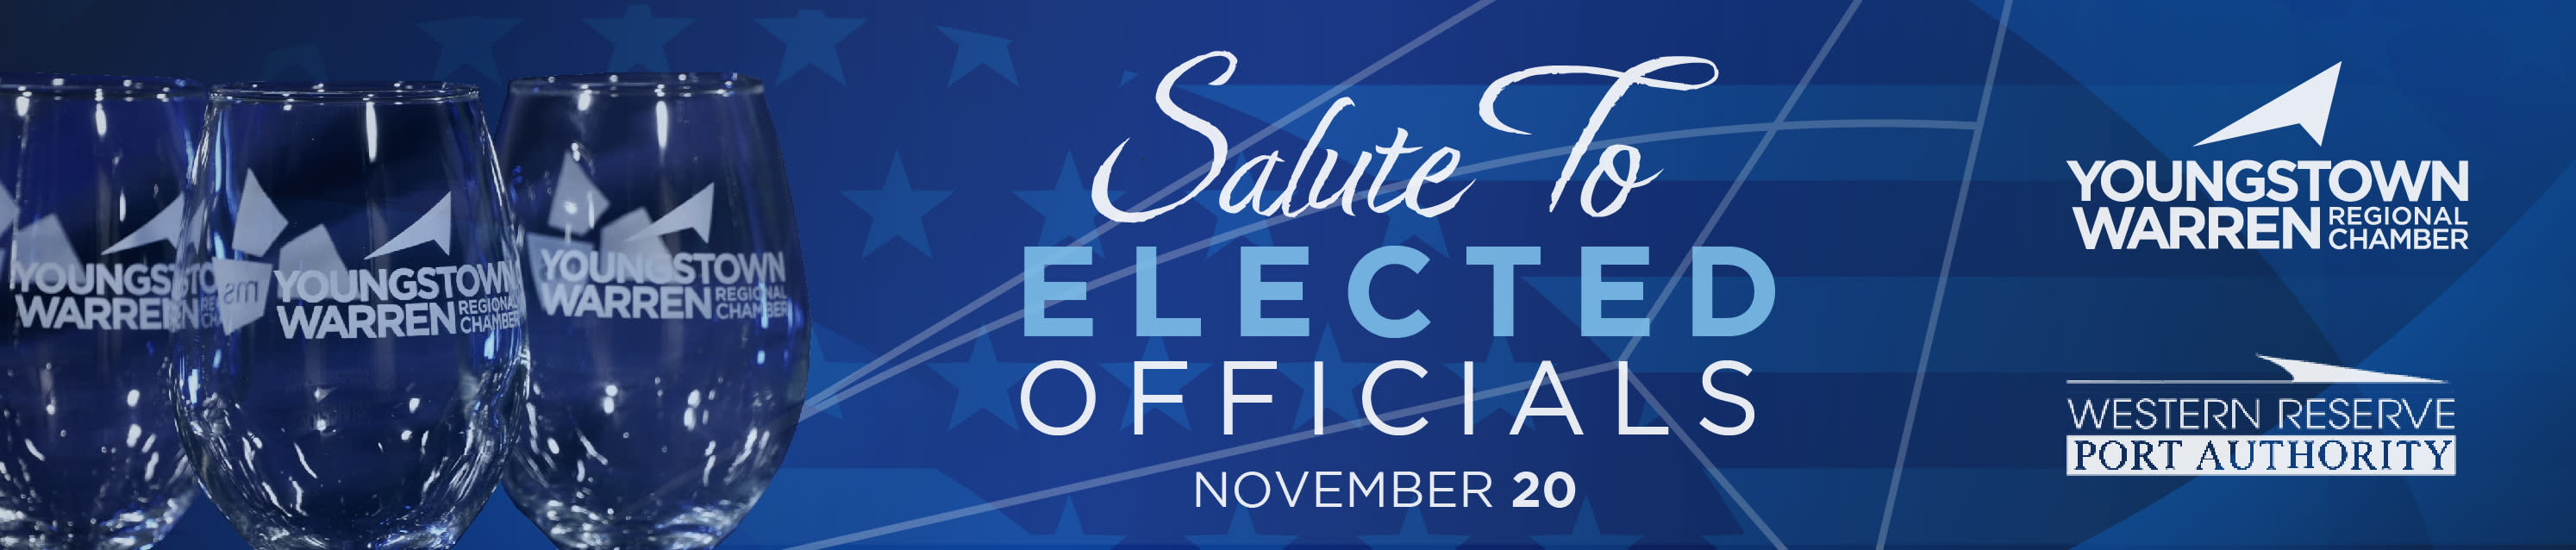 Salute to Elected Officials Event Registration